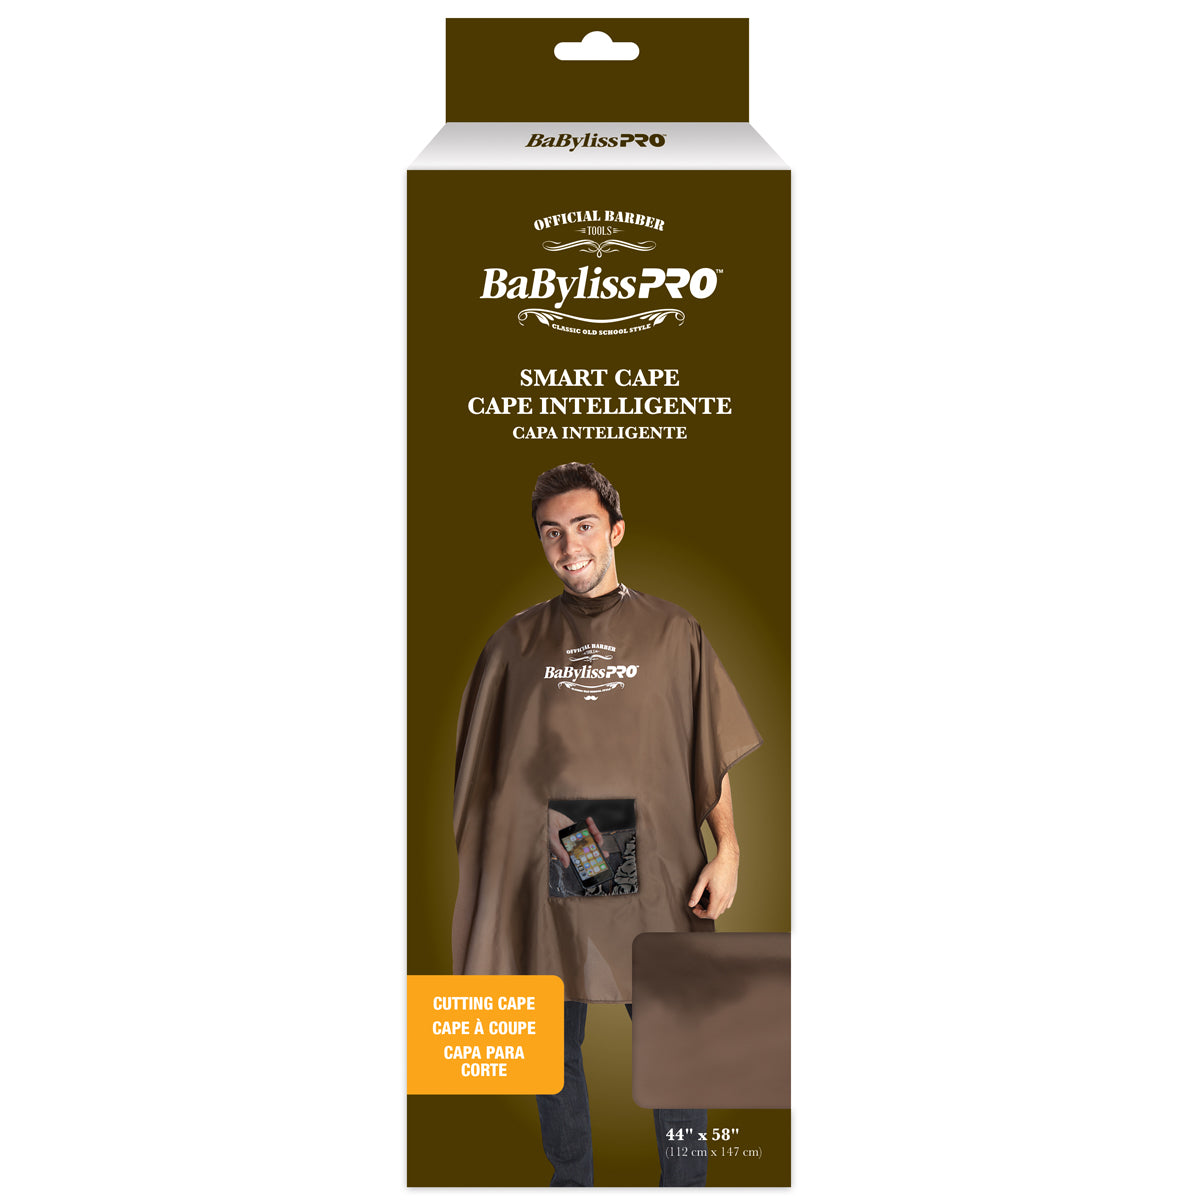 Babyliss Pro cutting cape with window